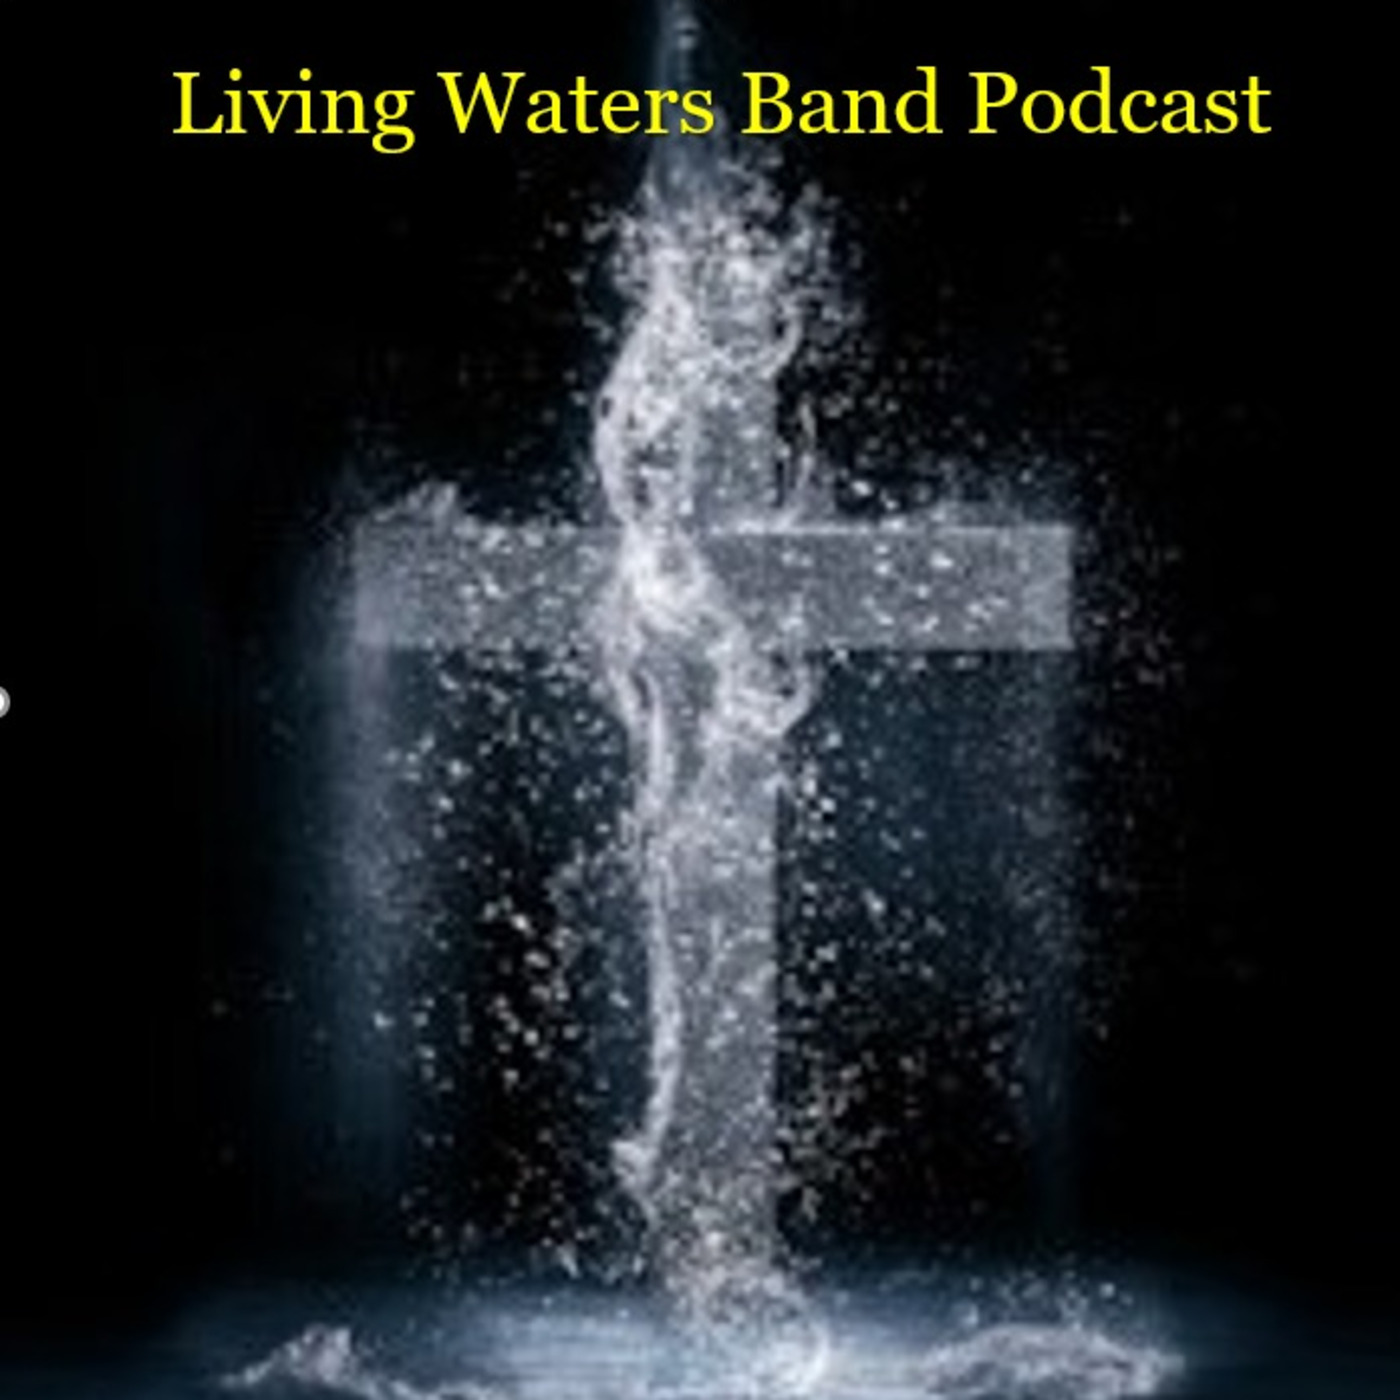 Living Waters Band Podcast